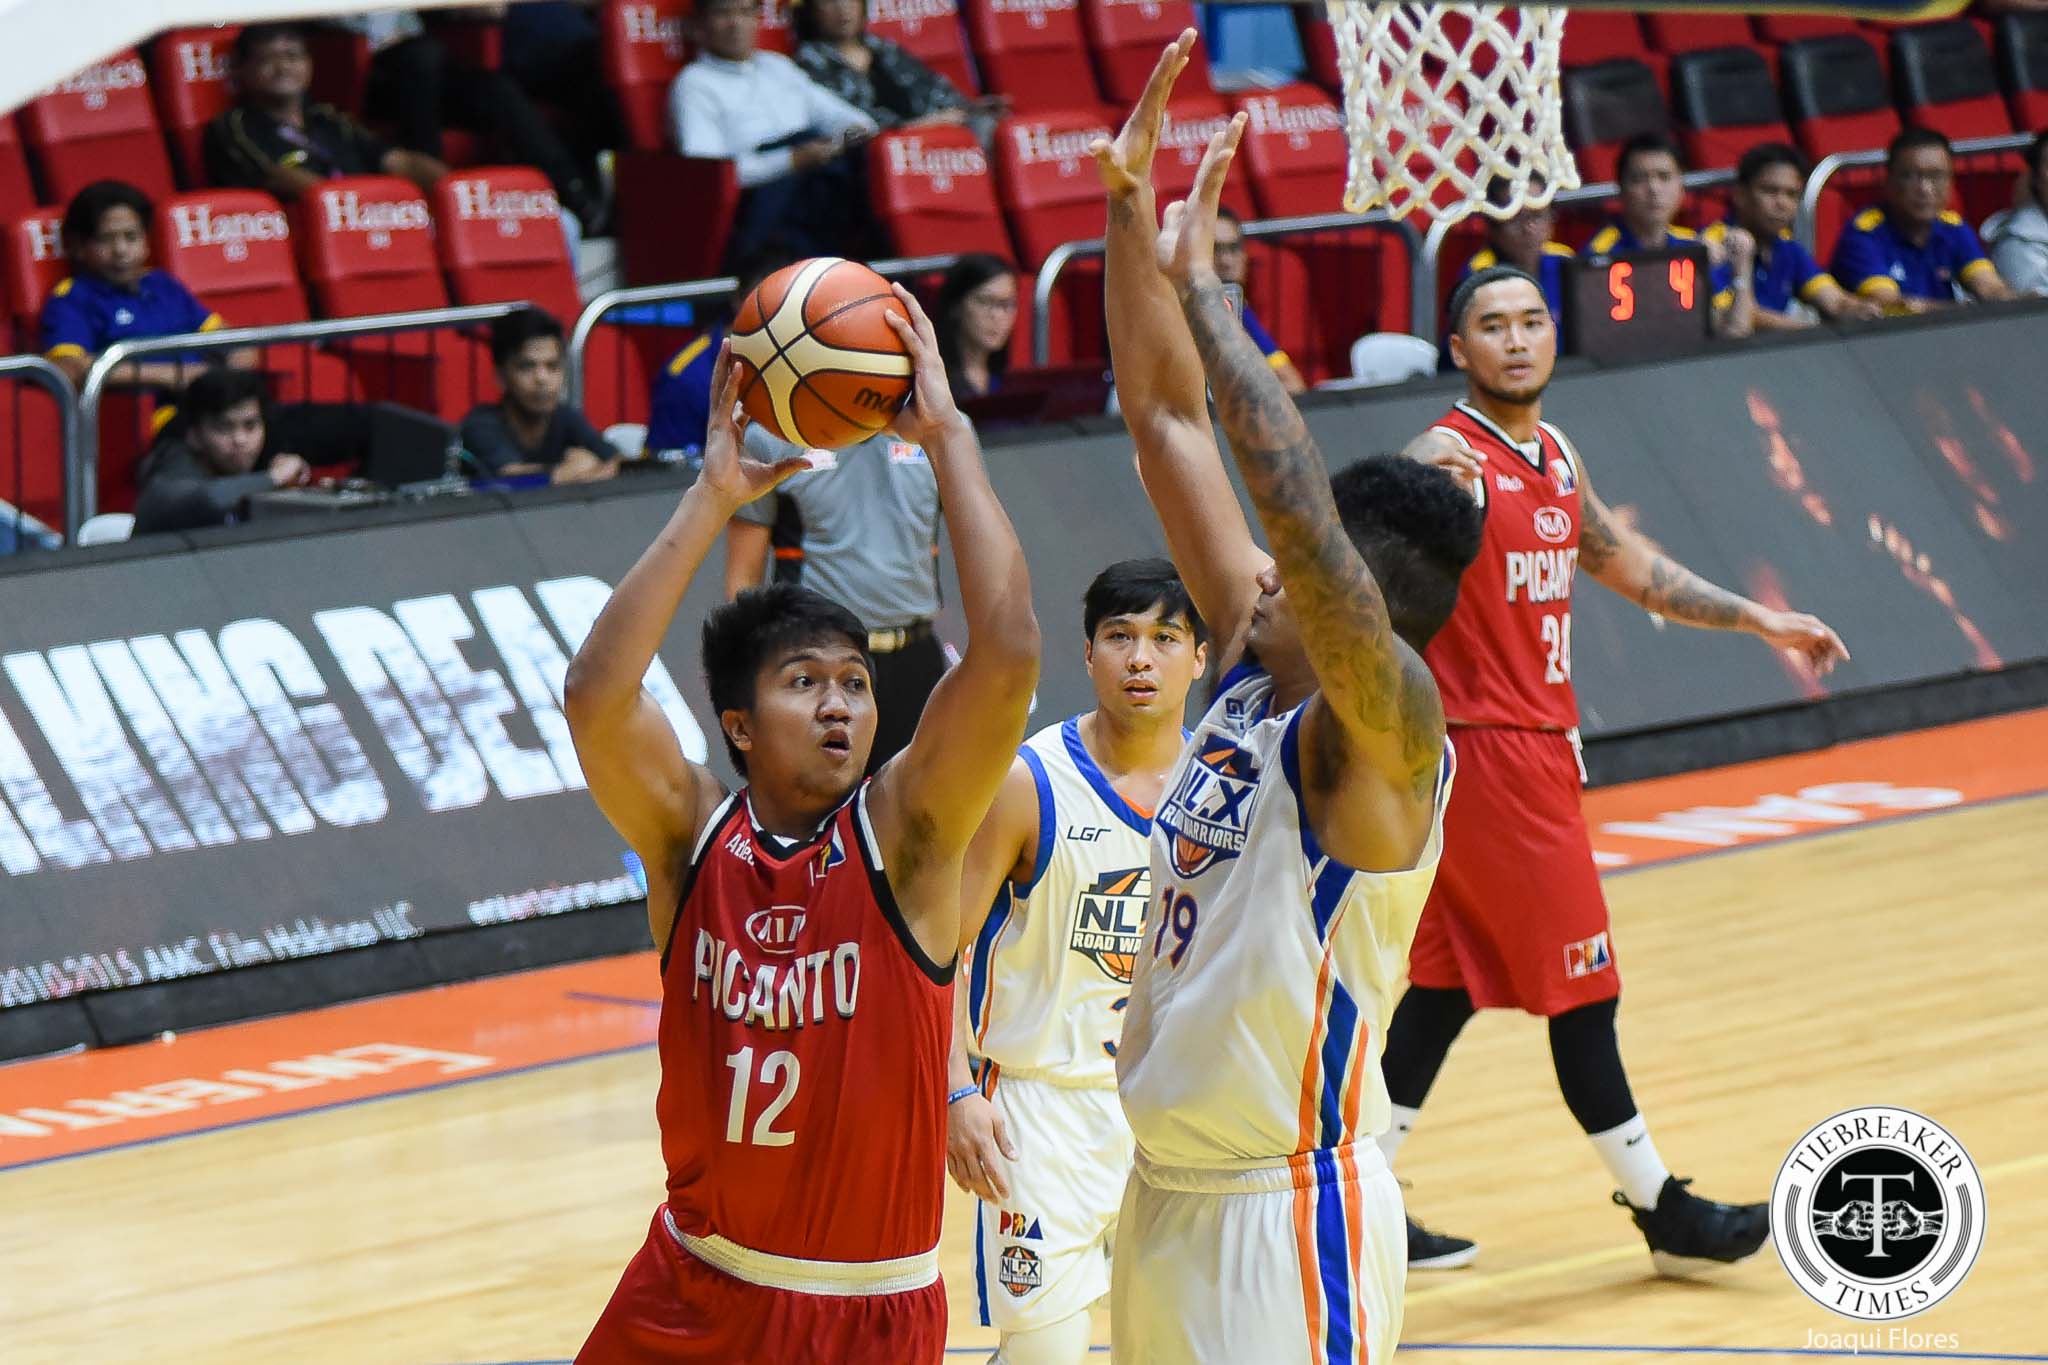 2018-PBA-Philippine-Cup-NLEX-vs.-KIA-Caperal-8078 Chris Gavina finds moral victory after loss to NLEX: 'We can do this against anybody' Basketball News PBA  - philippine sports news